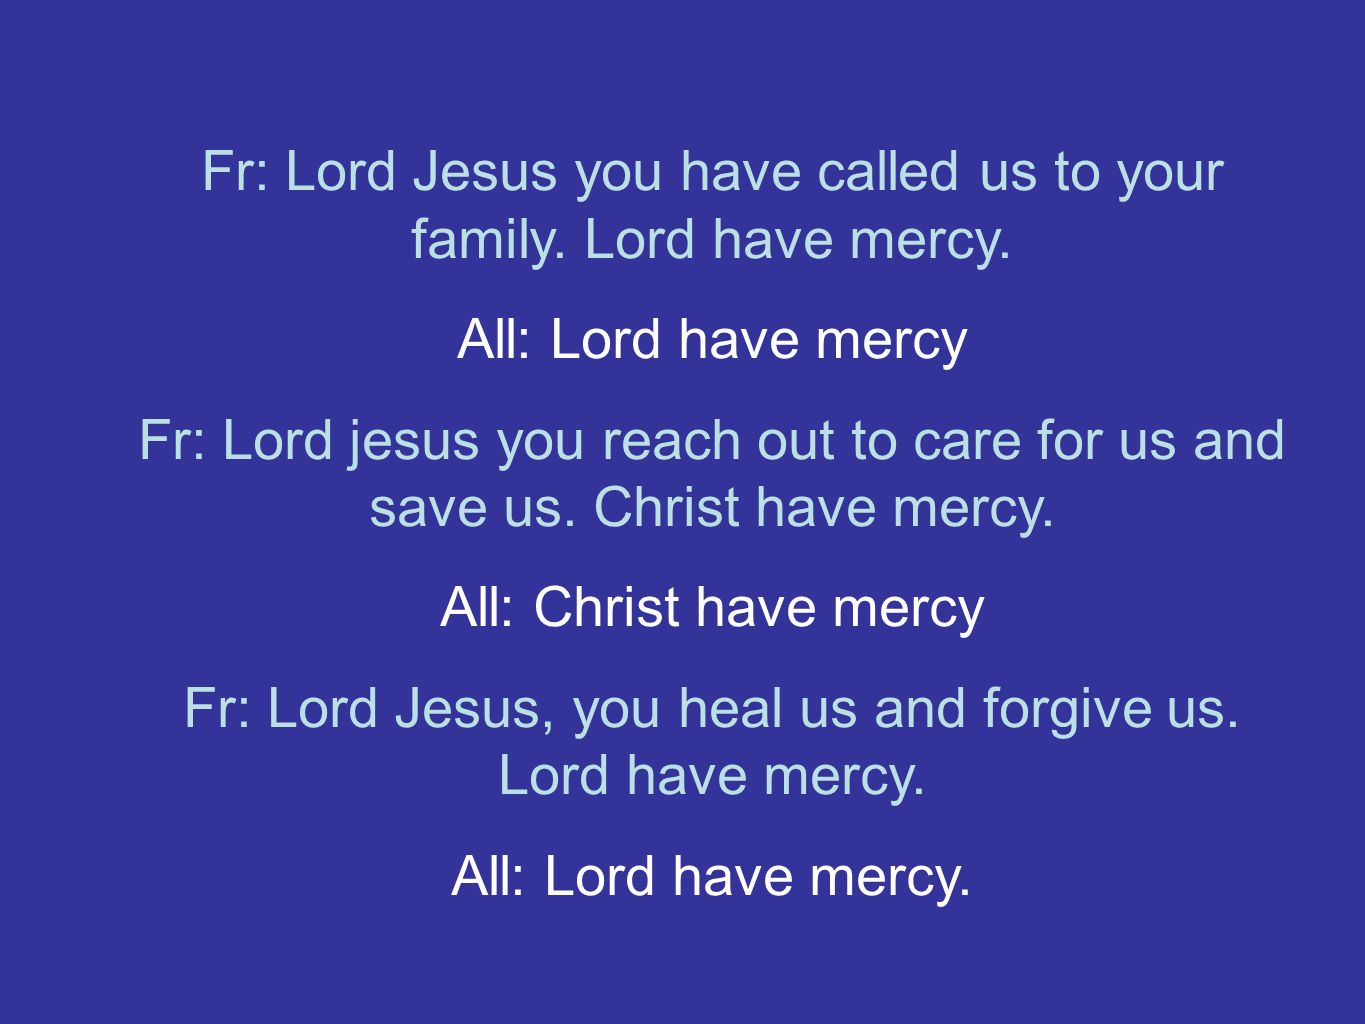 Fr: Lord Jesus you have called us to your family. Lord have mercy.